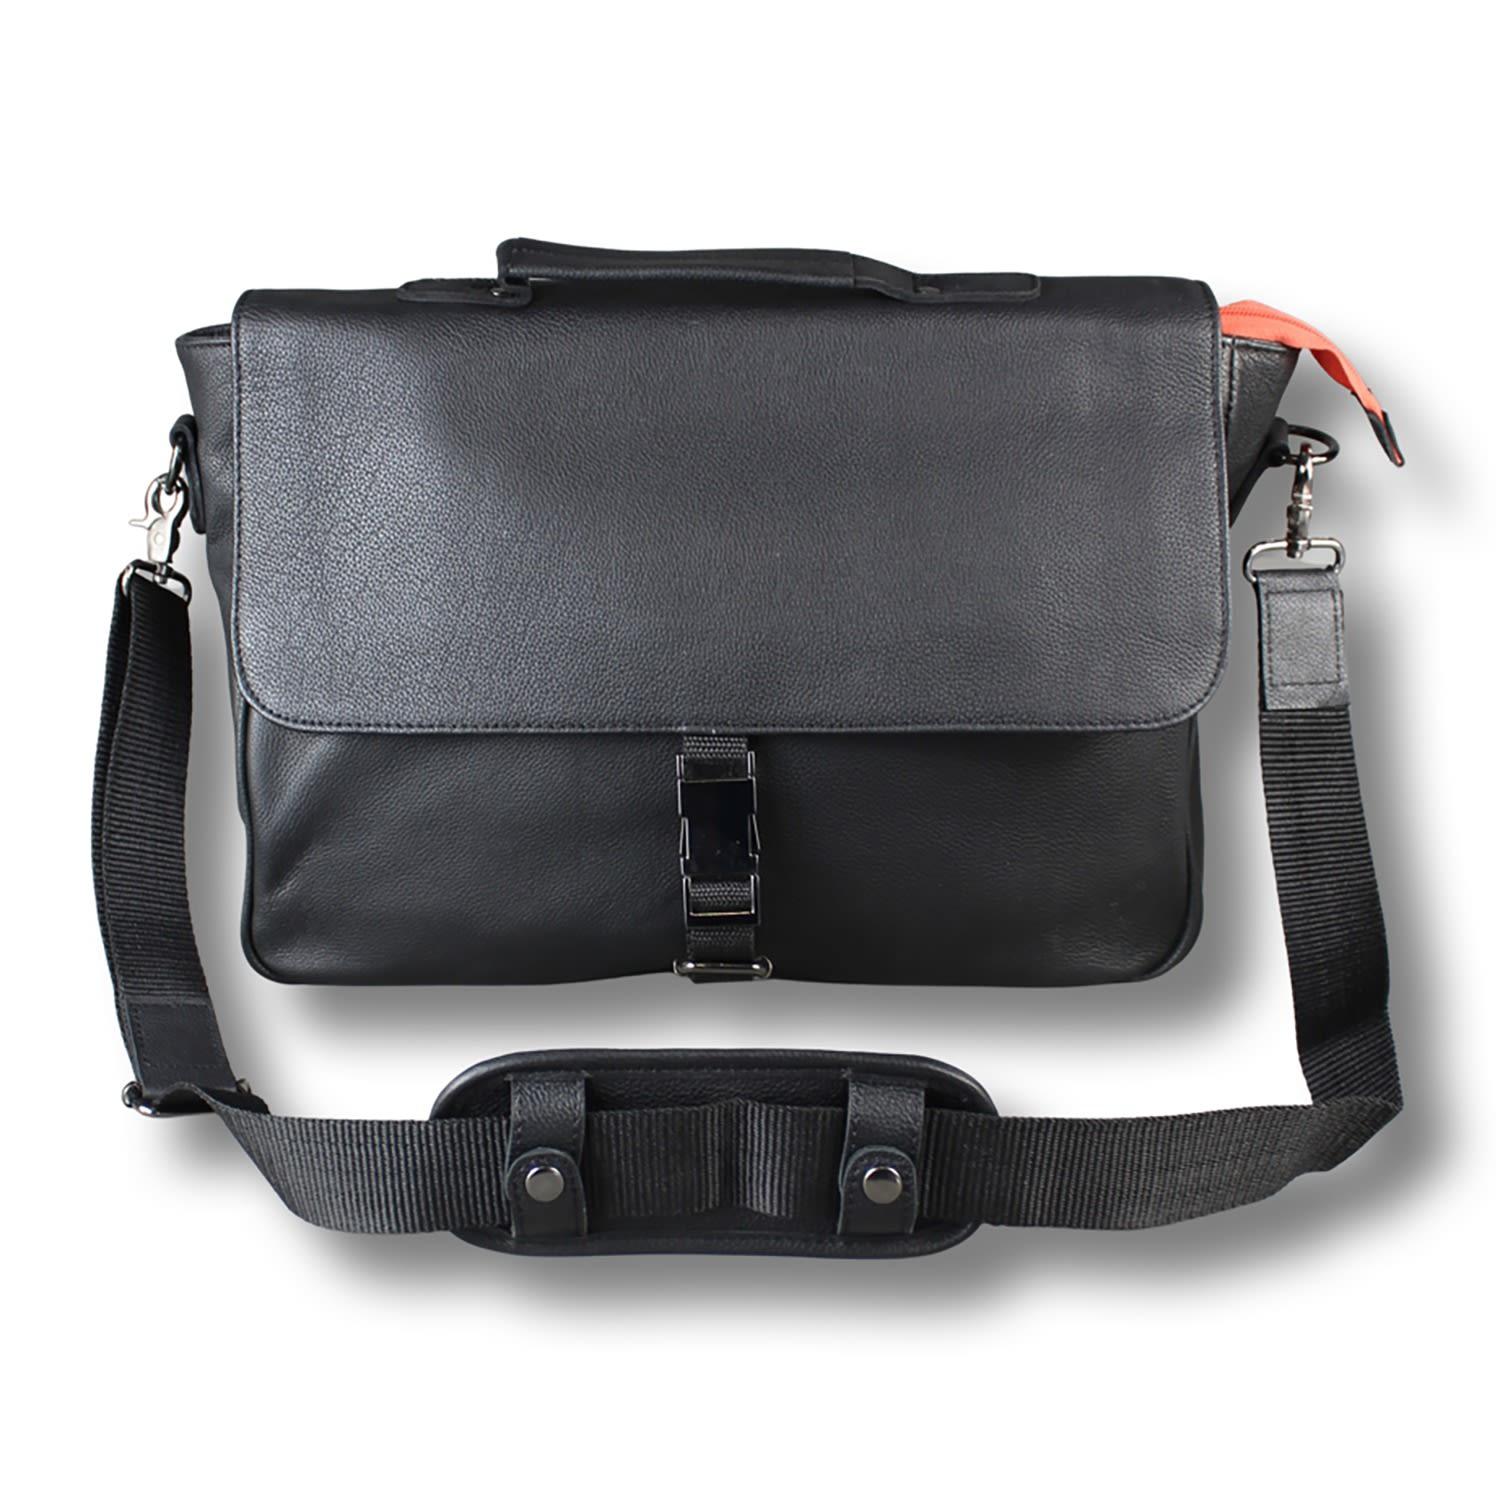 LeatherCo. Black Leather Laptop Messenger Bag With Orange Zip for